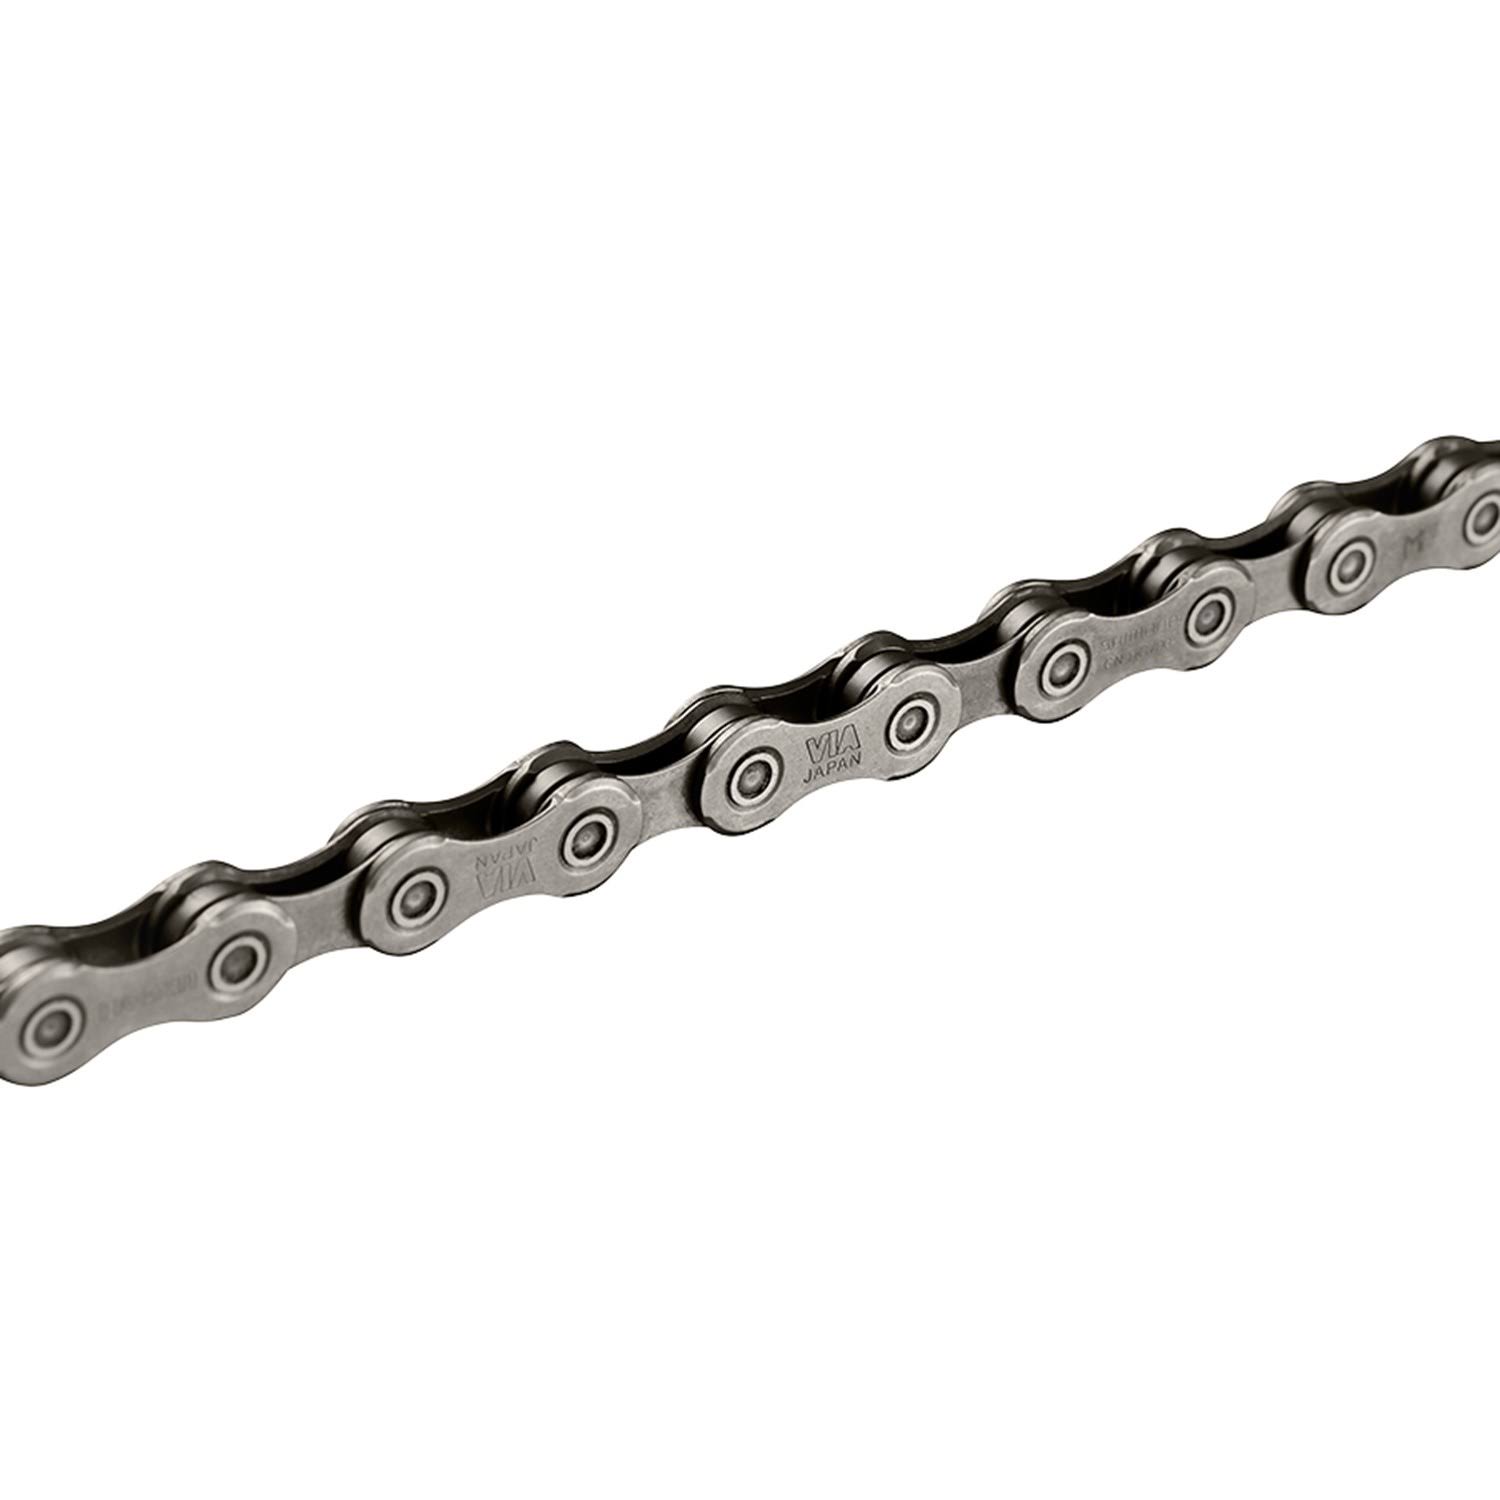 Shimano Ultegra Deore XT Bicycle Chain - 11 Speed